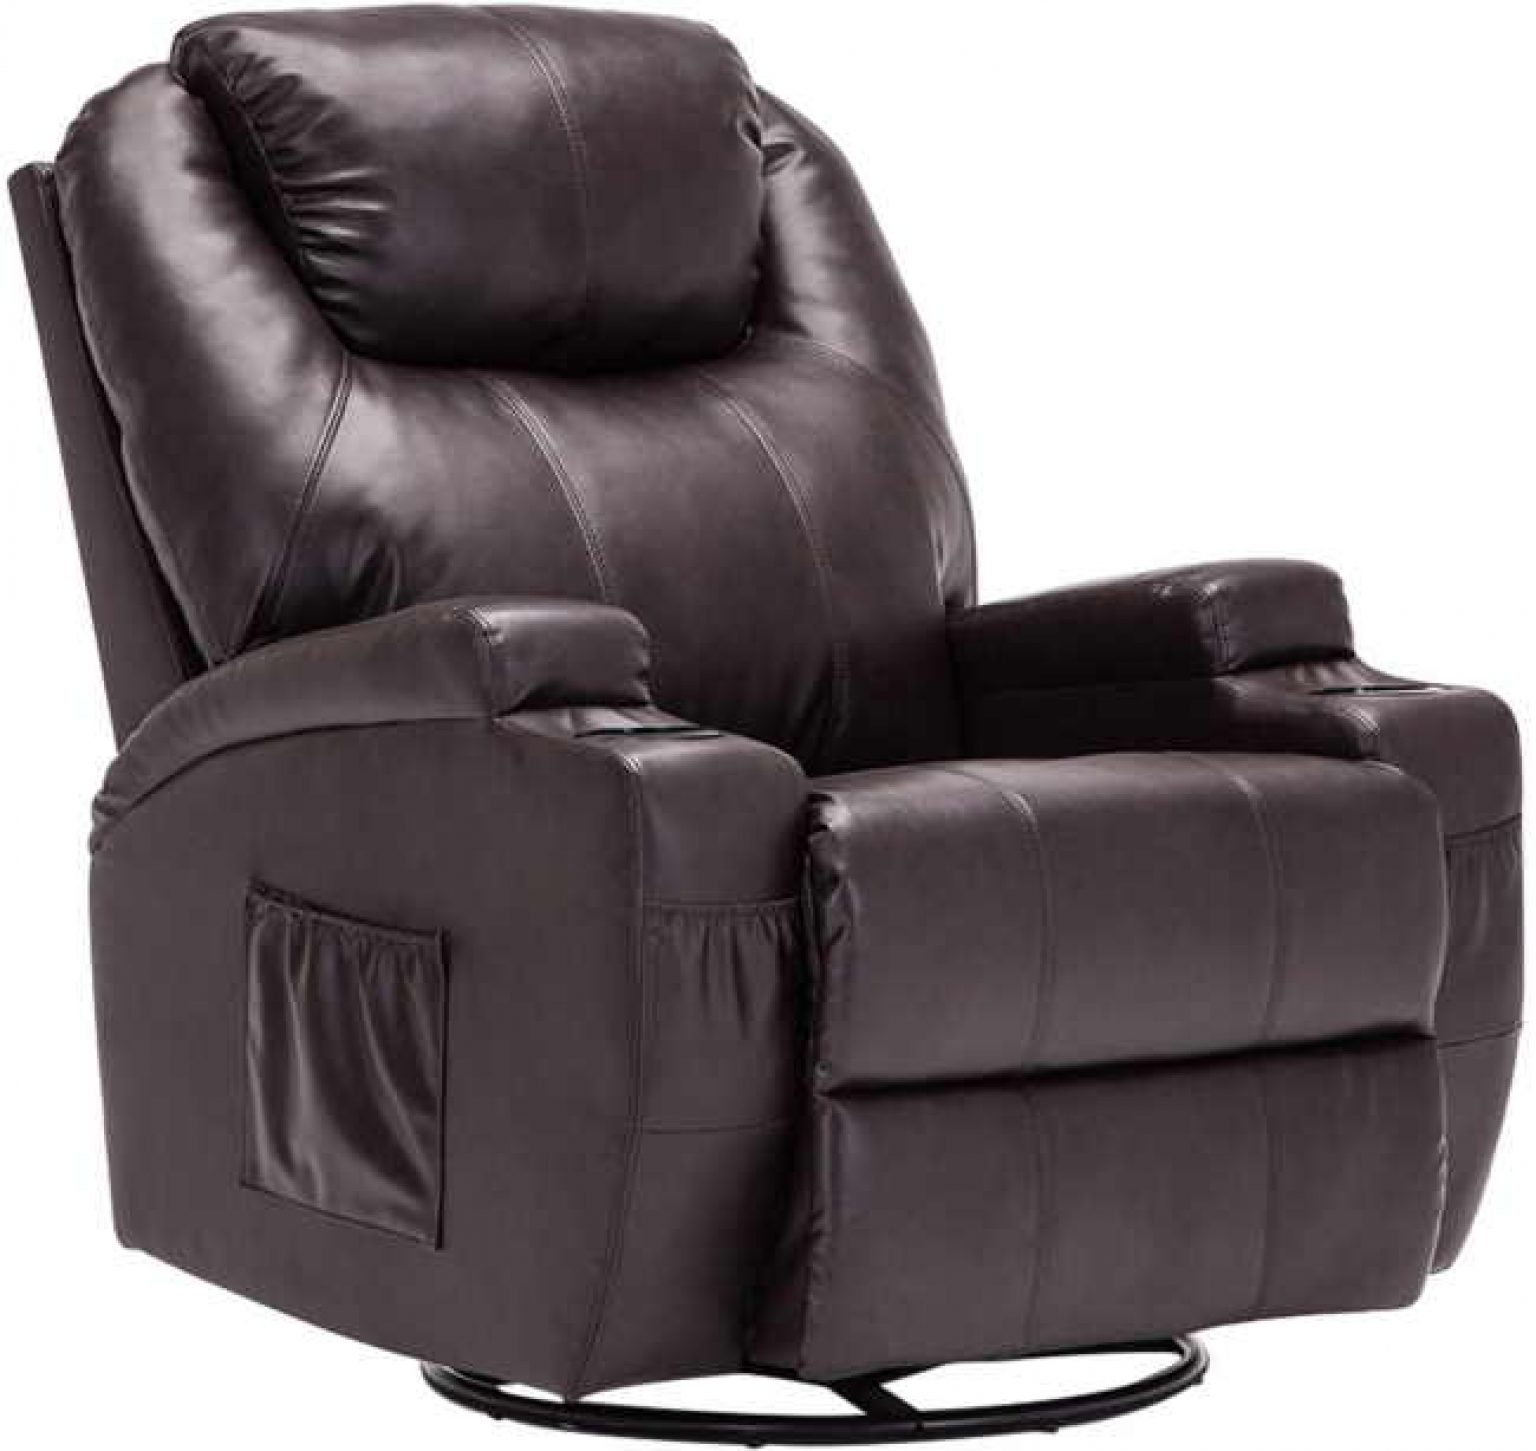 10 Best Real Leather Swivel Recliner Chairs - Buying Guide 2021